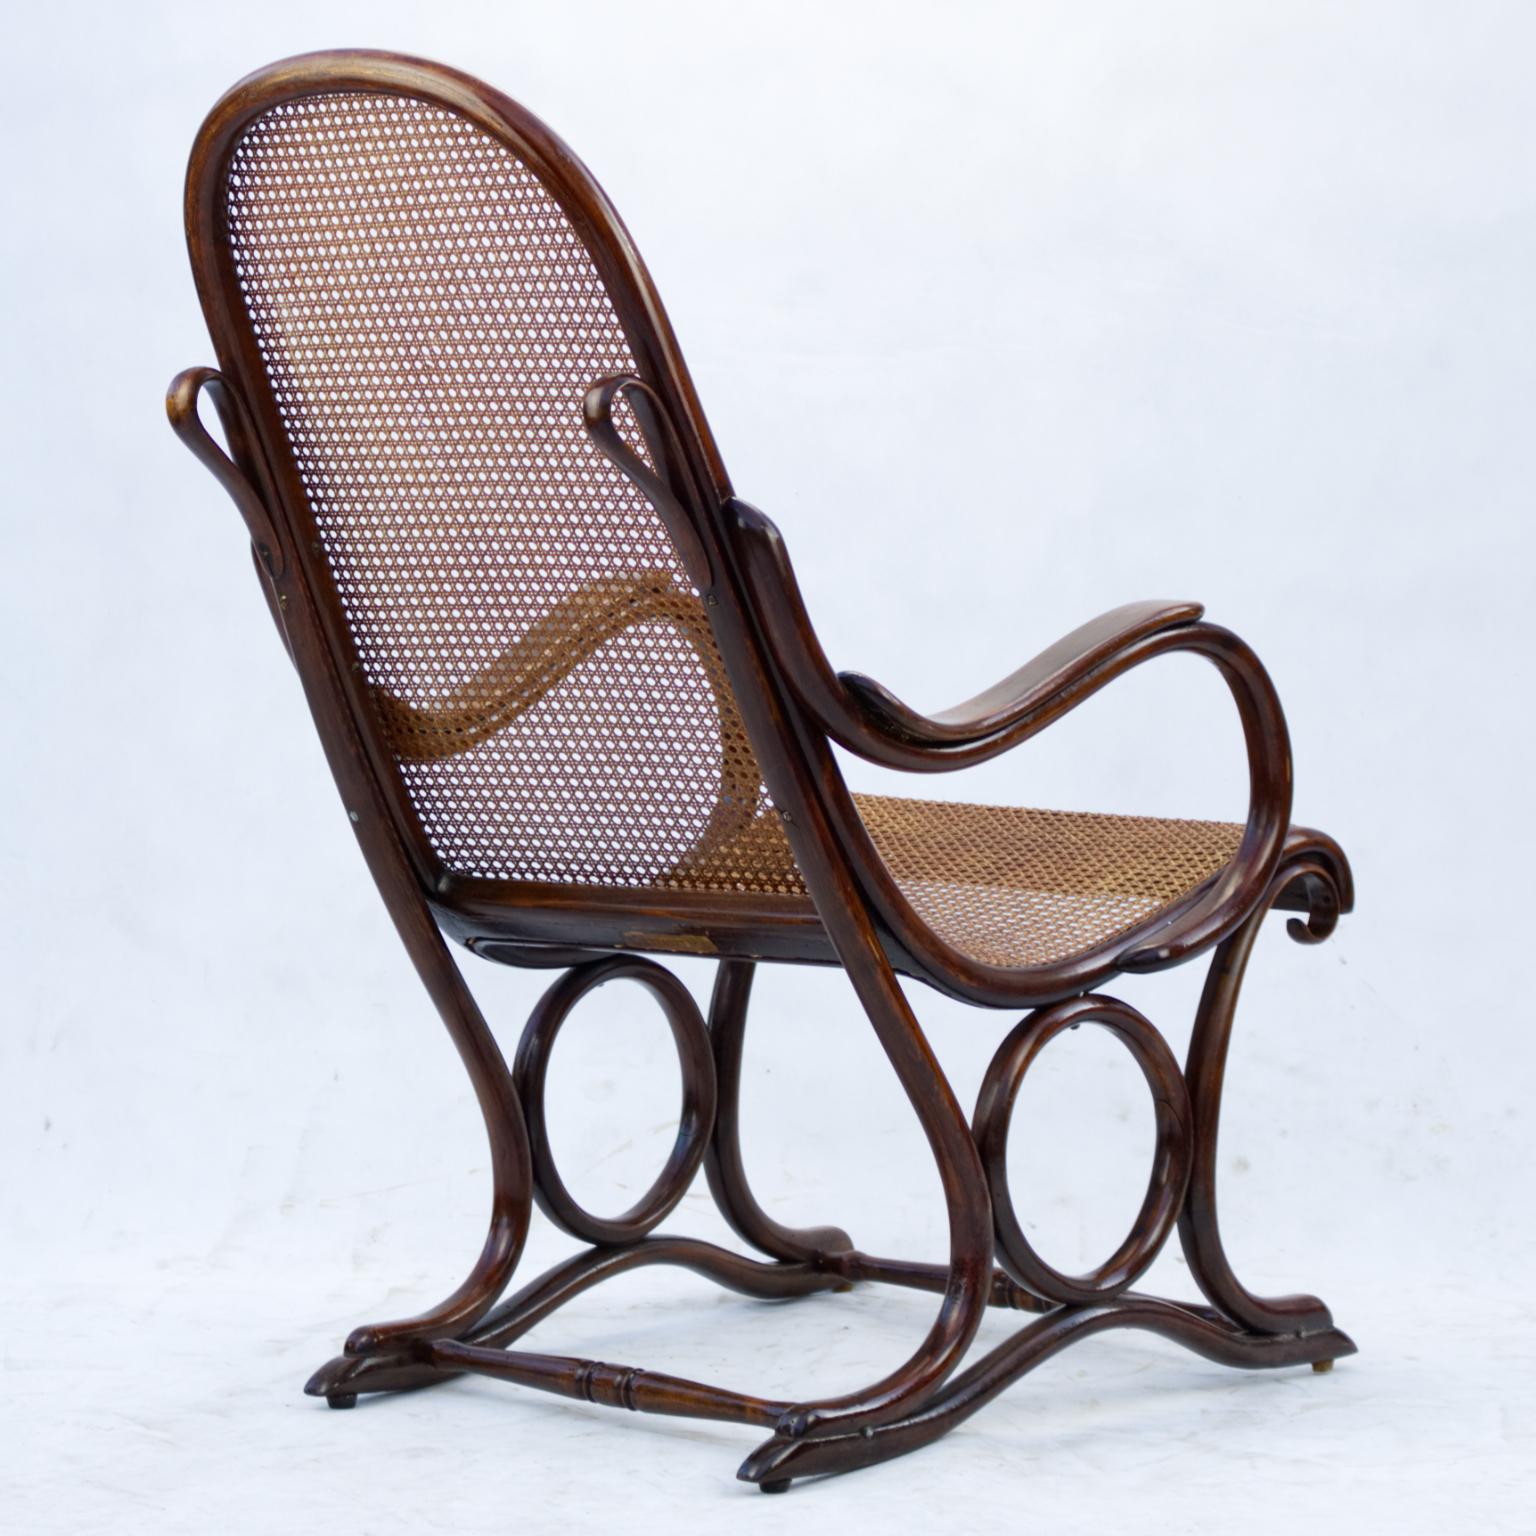 Bentwood Cane Salonfauteuil Easy Chair Thonet No. 1, circa 1890 For Sale 3